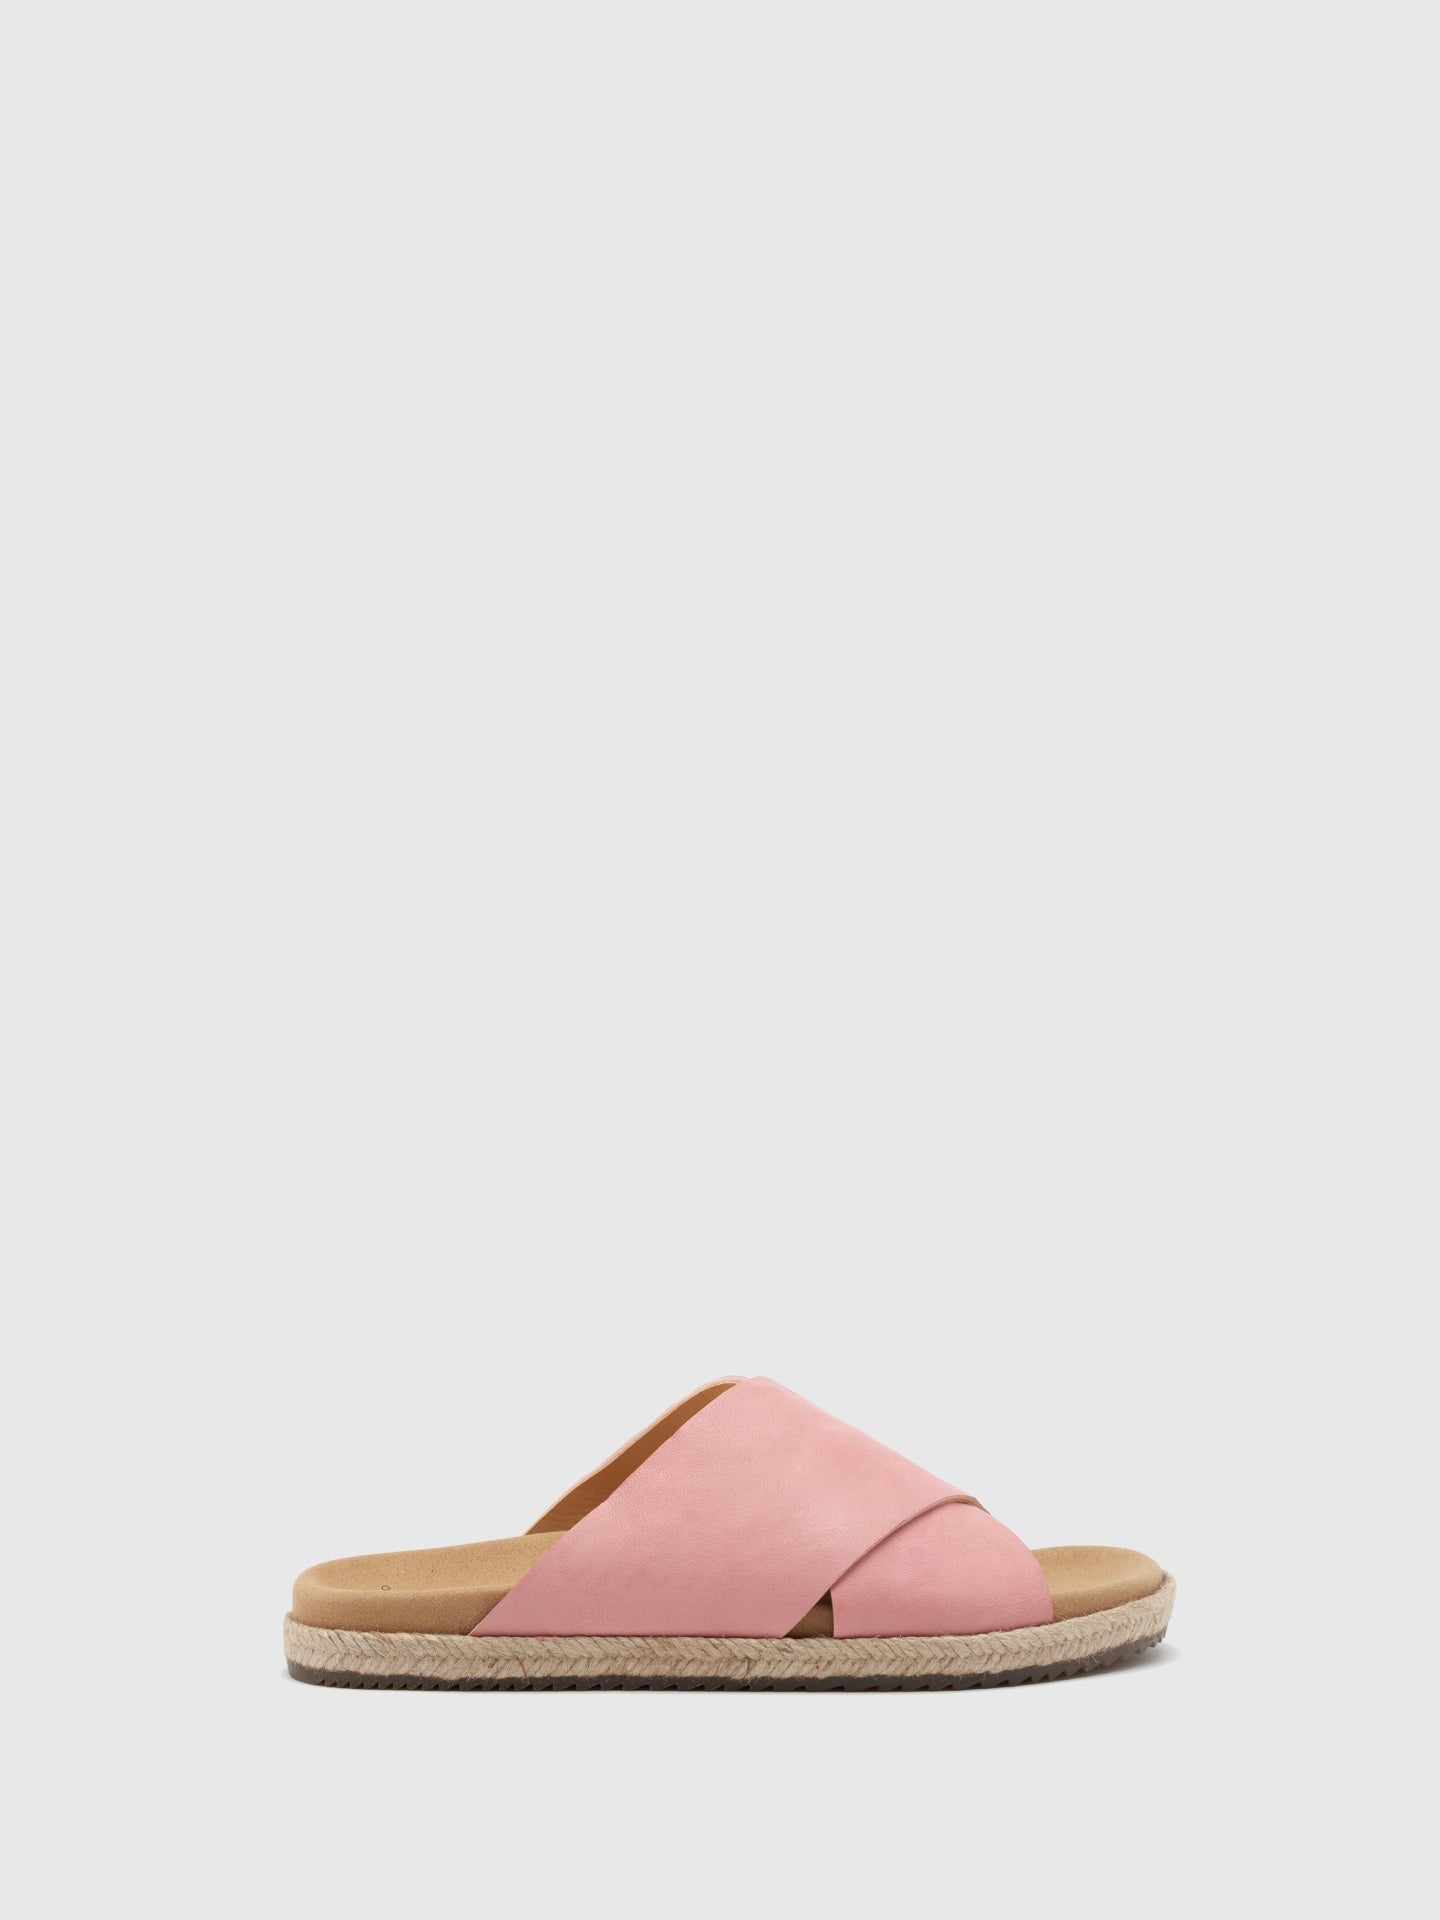 Only2Me Pink Leather Open Toe Mules